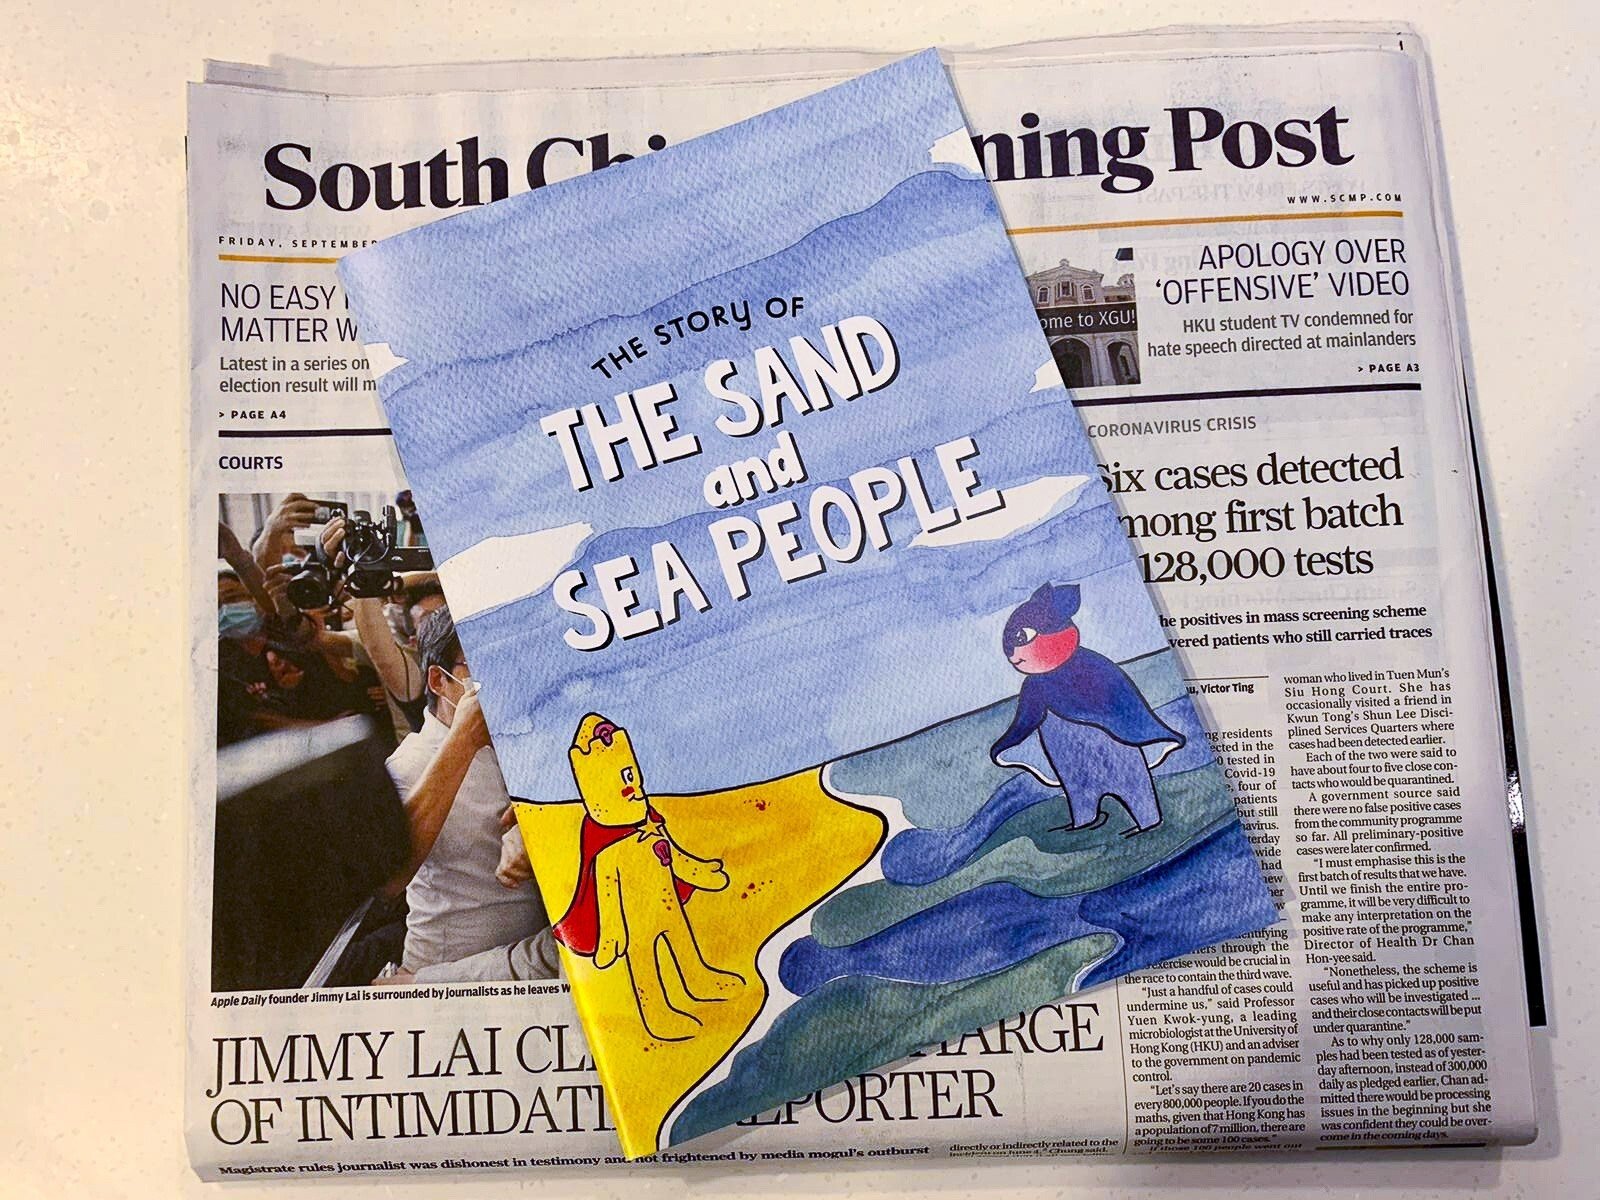 The illustrated booklet that came with Friday’s print edition of the Post. Photo: Yonden Lhatoo